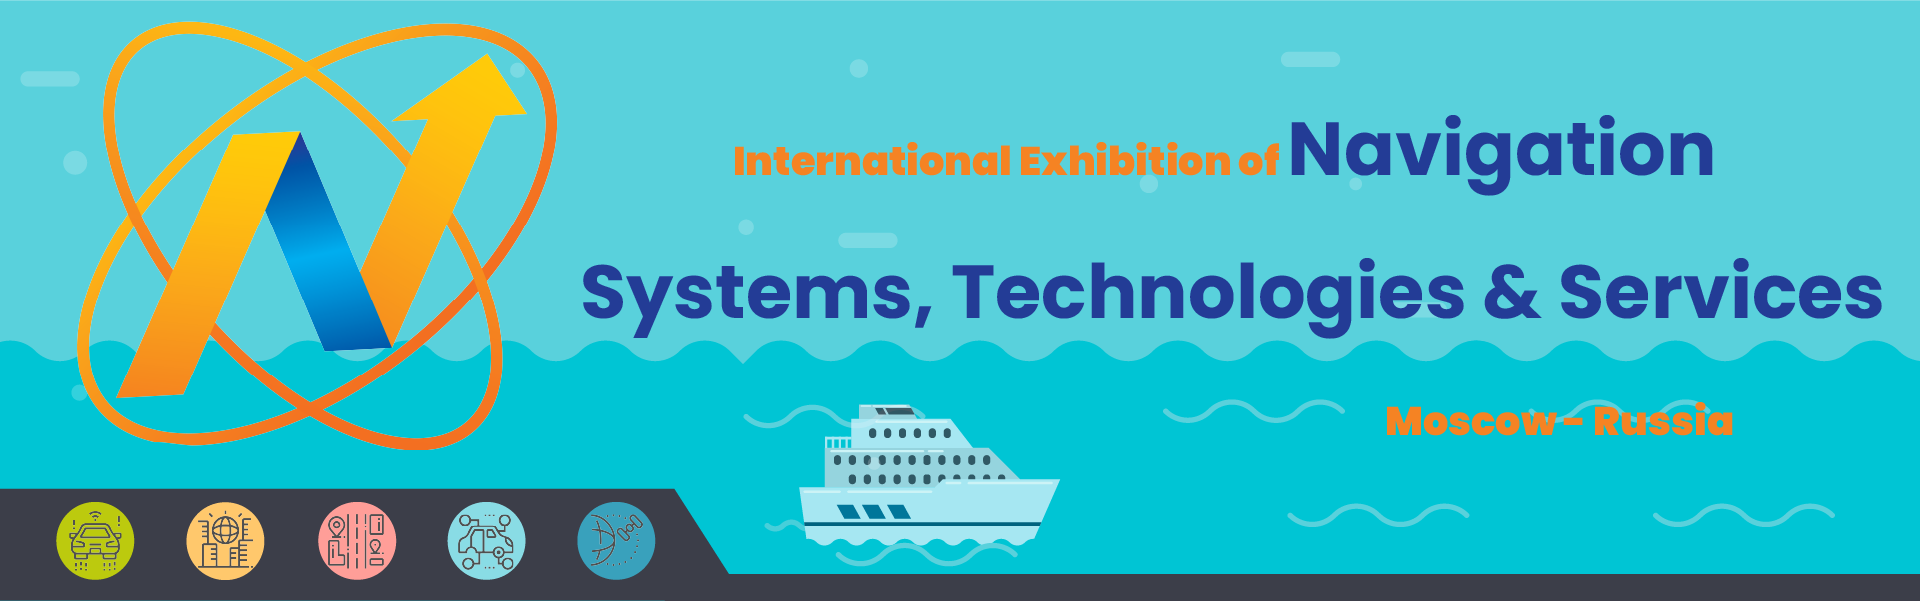 Navigation systems technologies and services Exhibition Russia Moscow